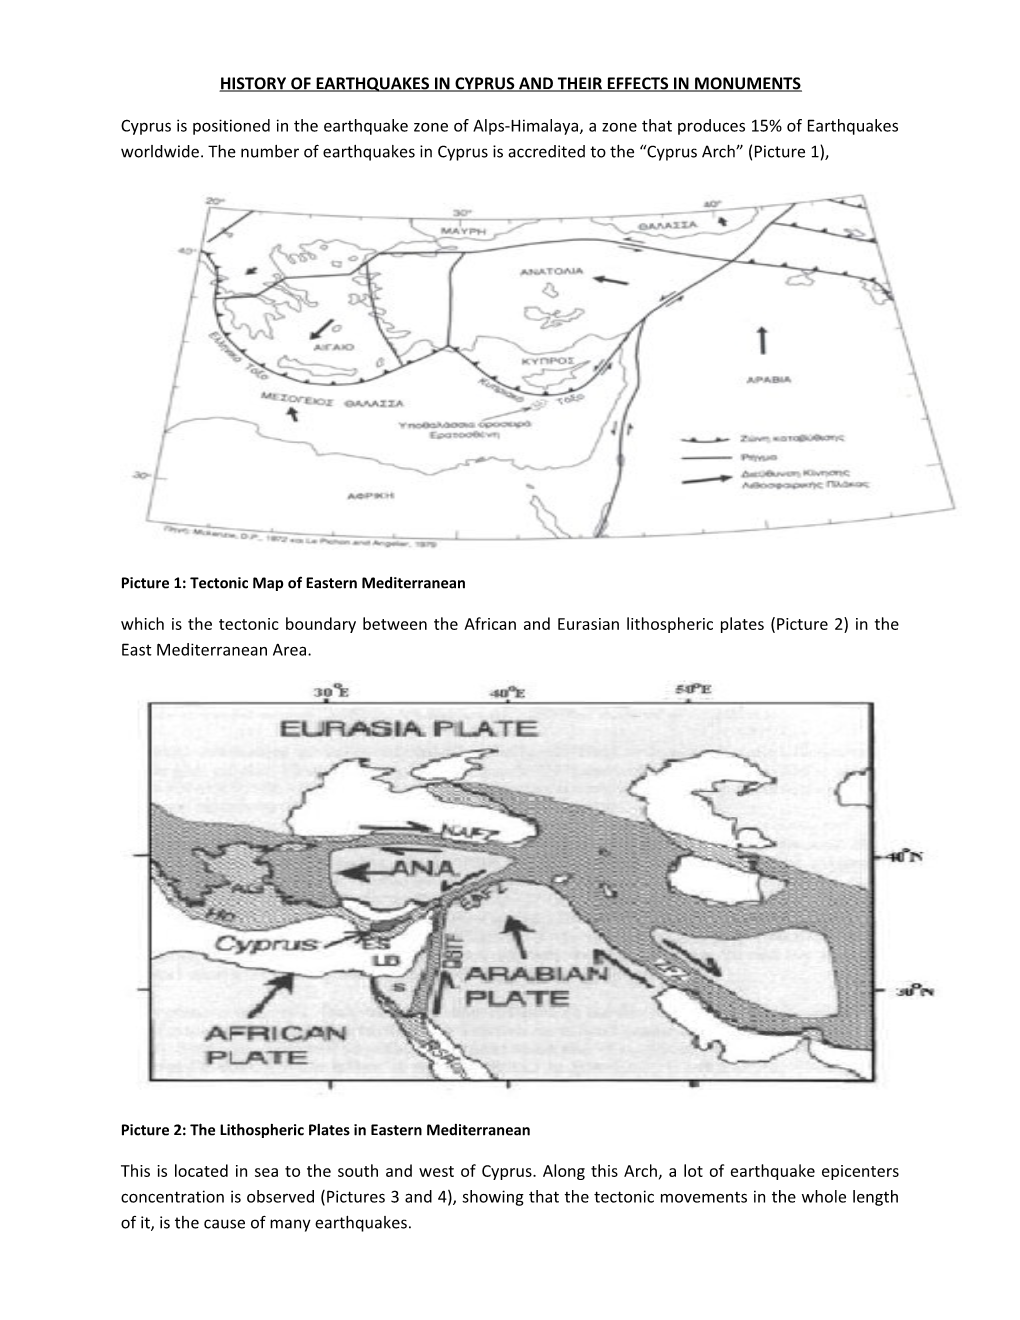 History of Earthquakes in Cyprus and Their Effects in Monuments